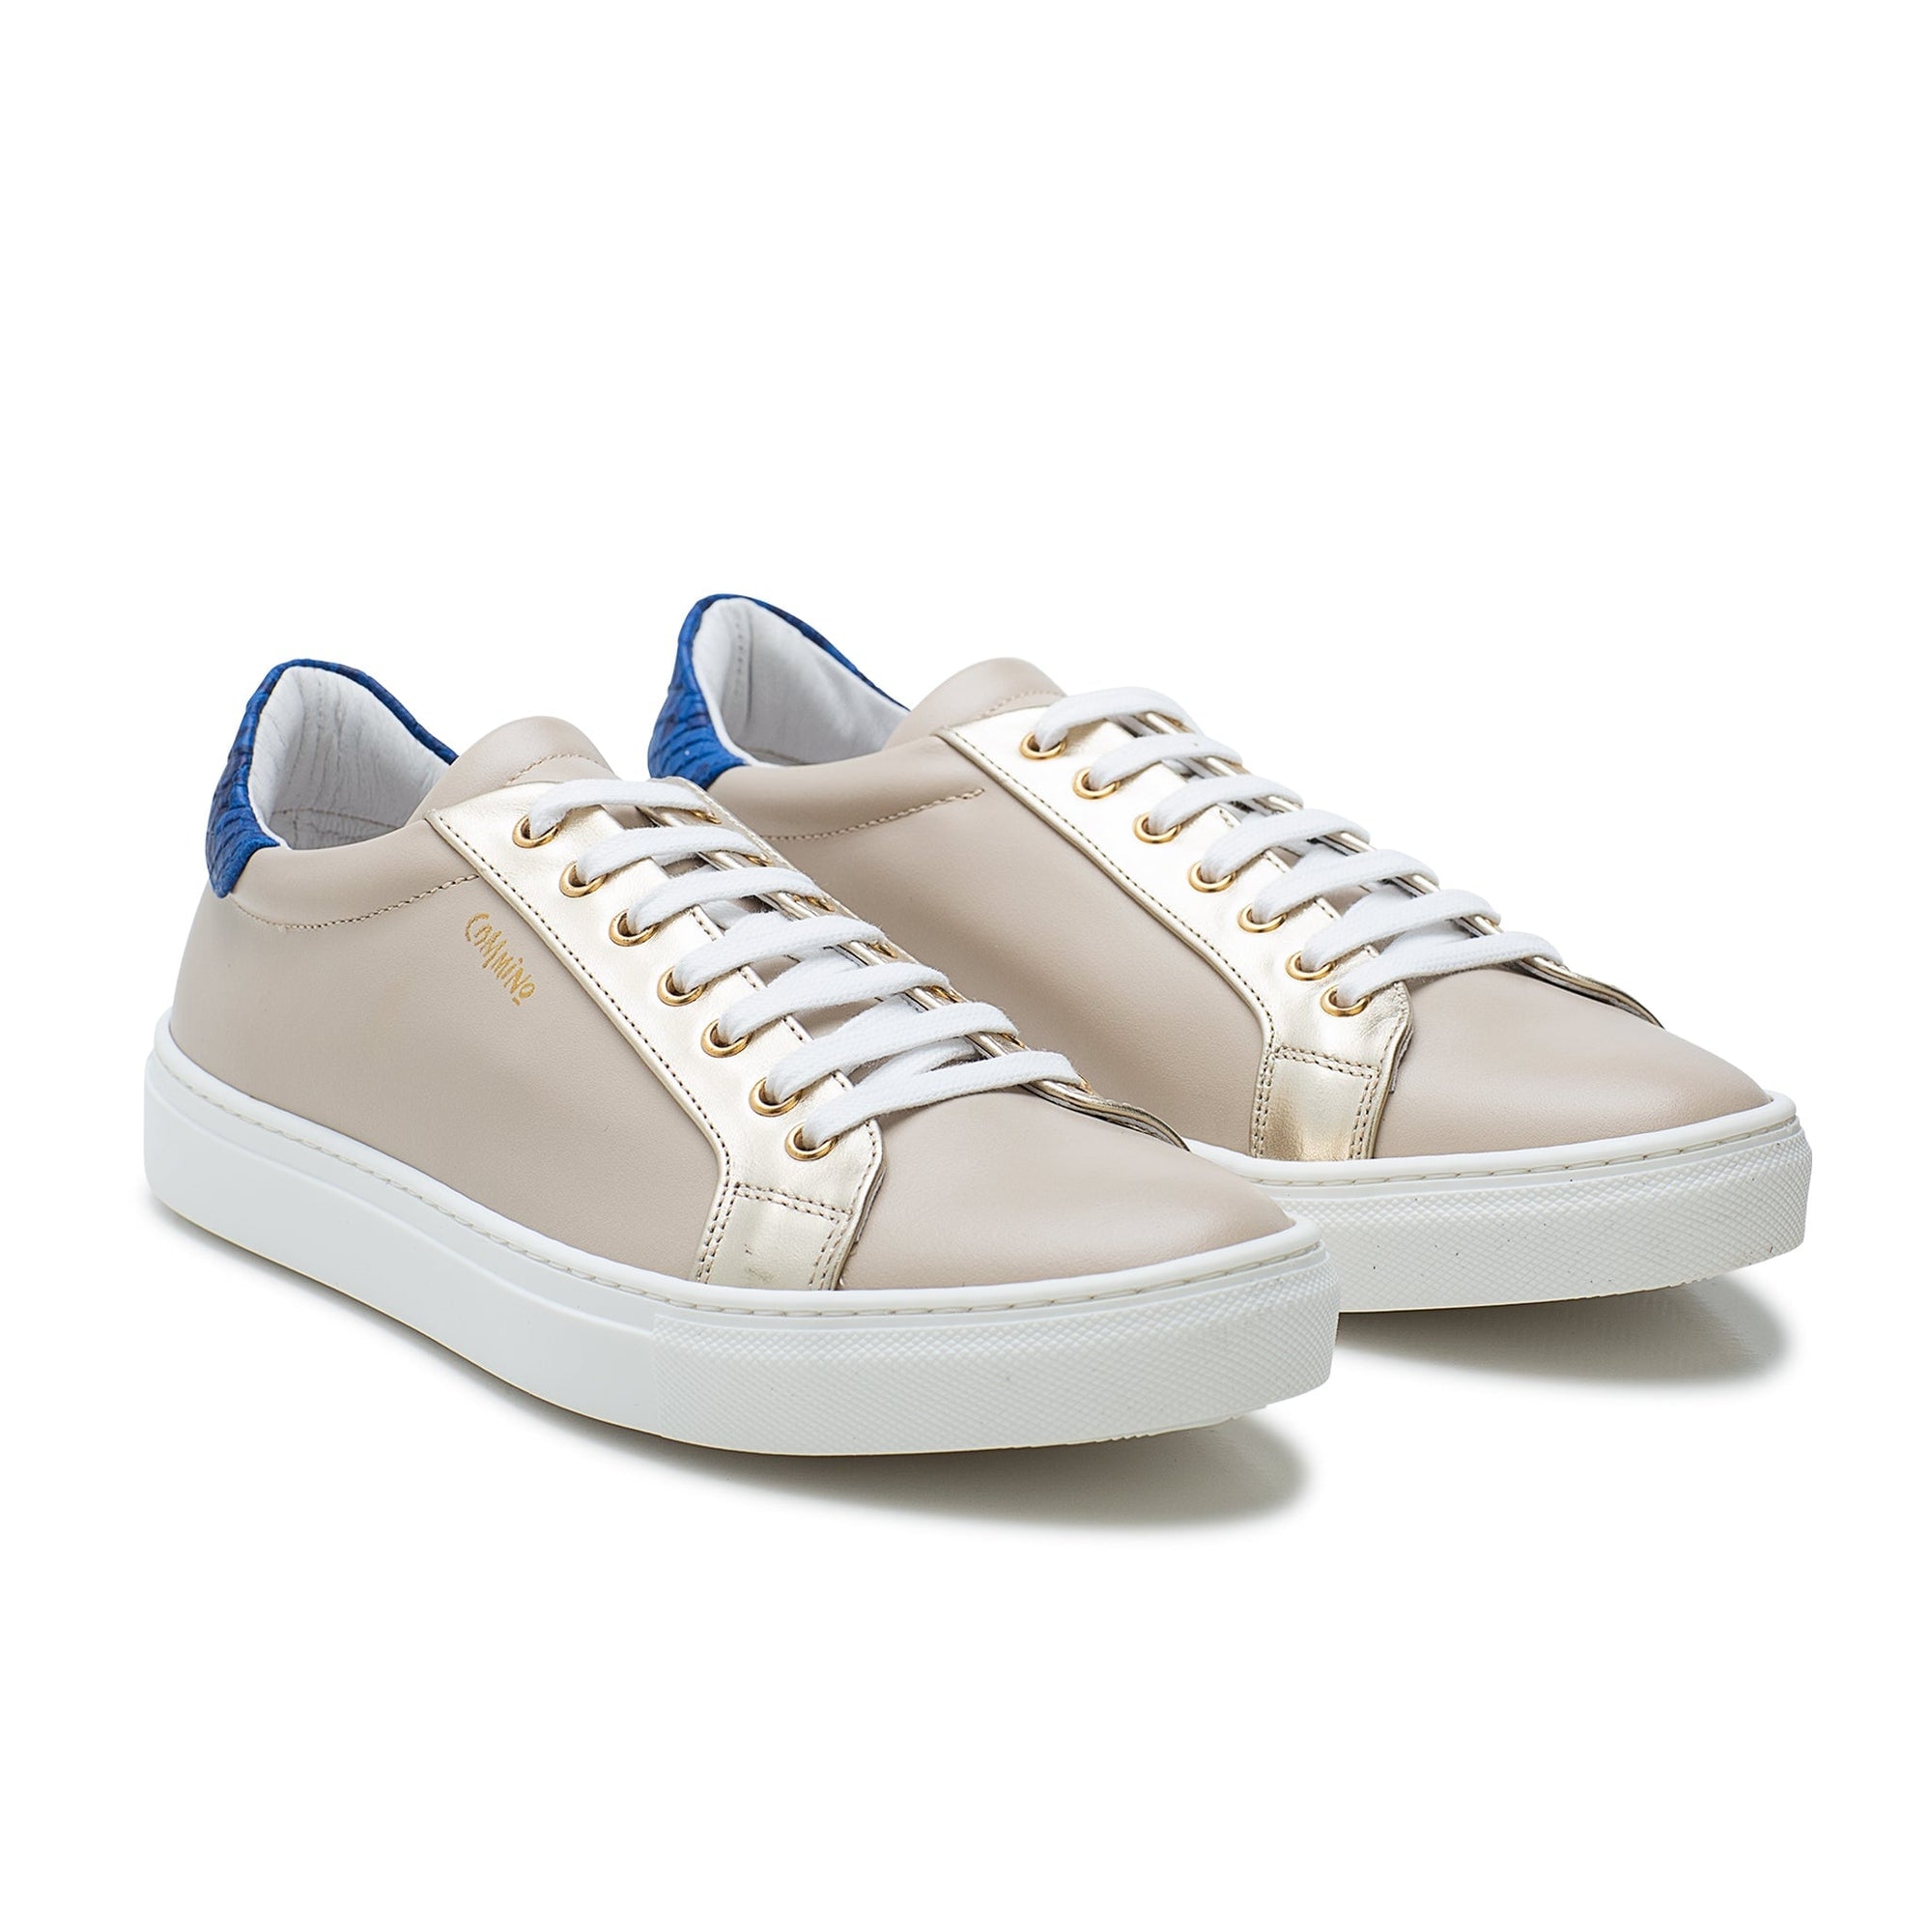 Sorrento- platinum and blue sneaker Sneakers Cammino Shoes 